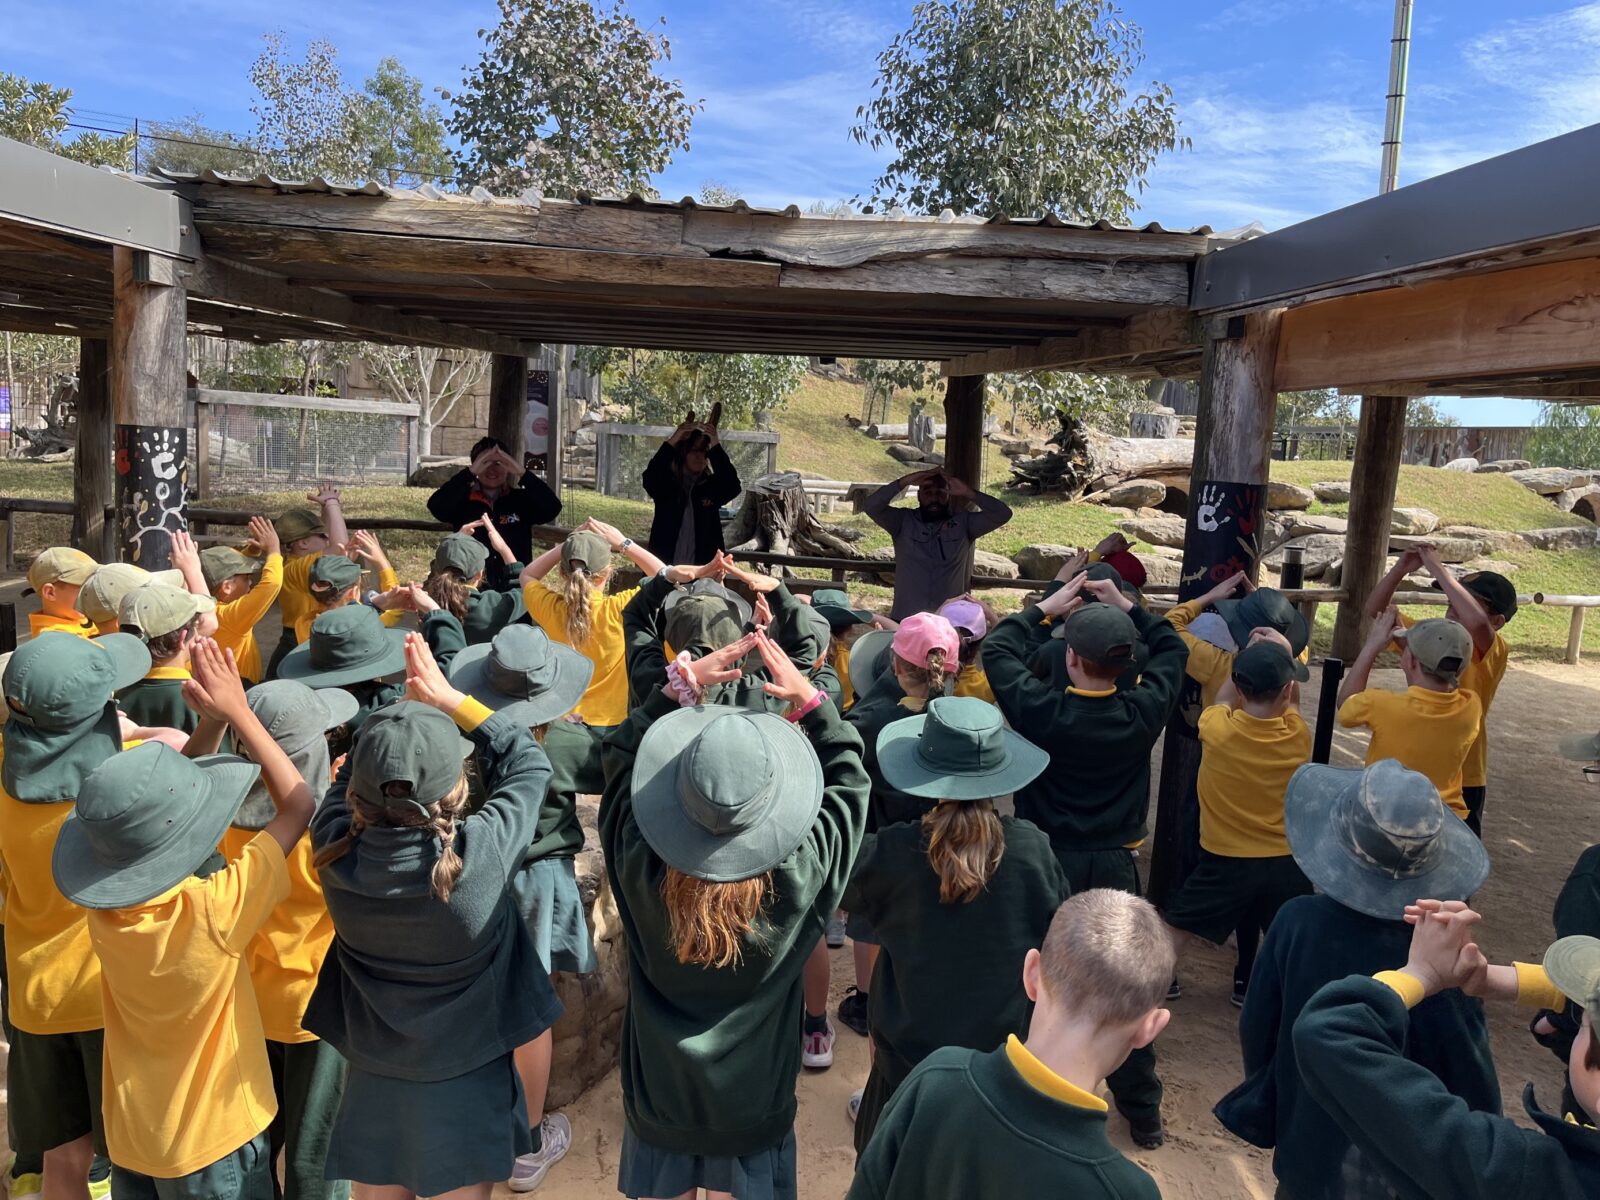 A large group of children in green hats learning from zoo keepers at a zoo